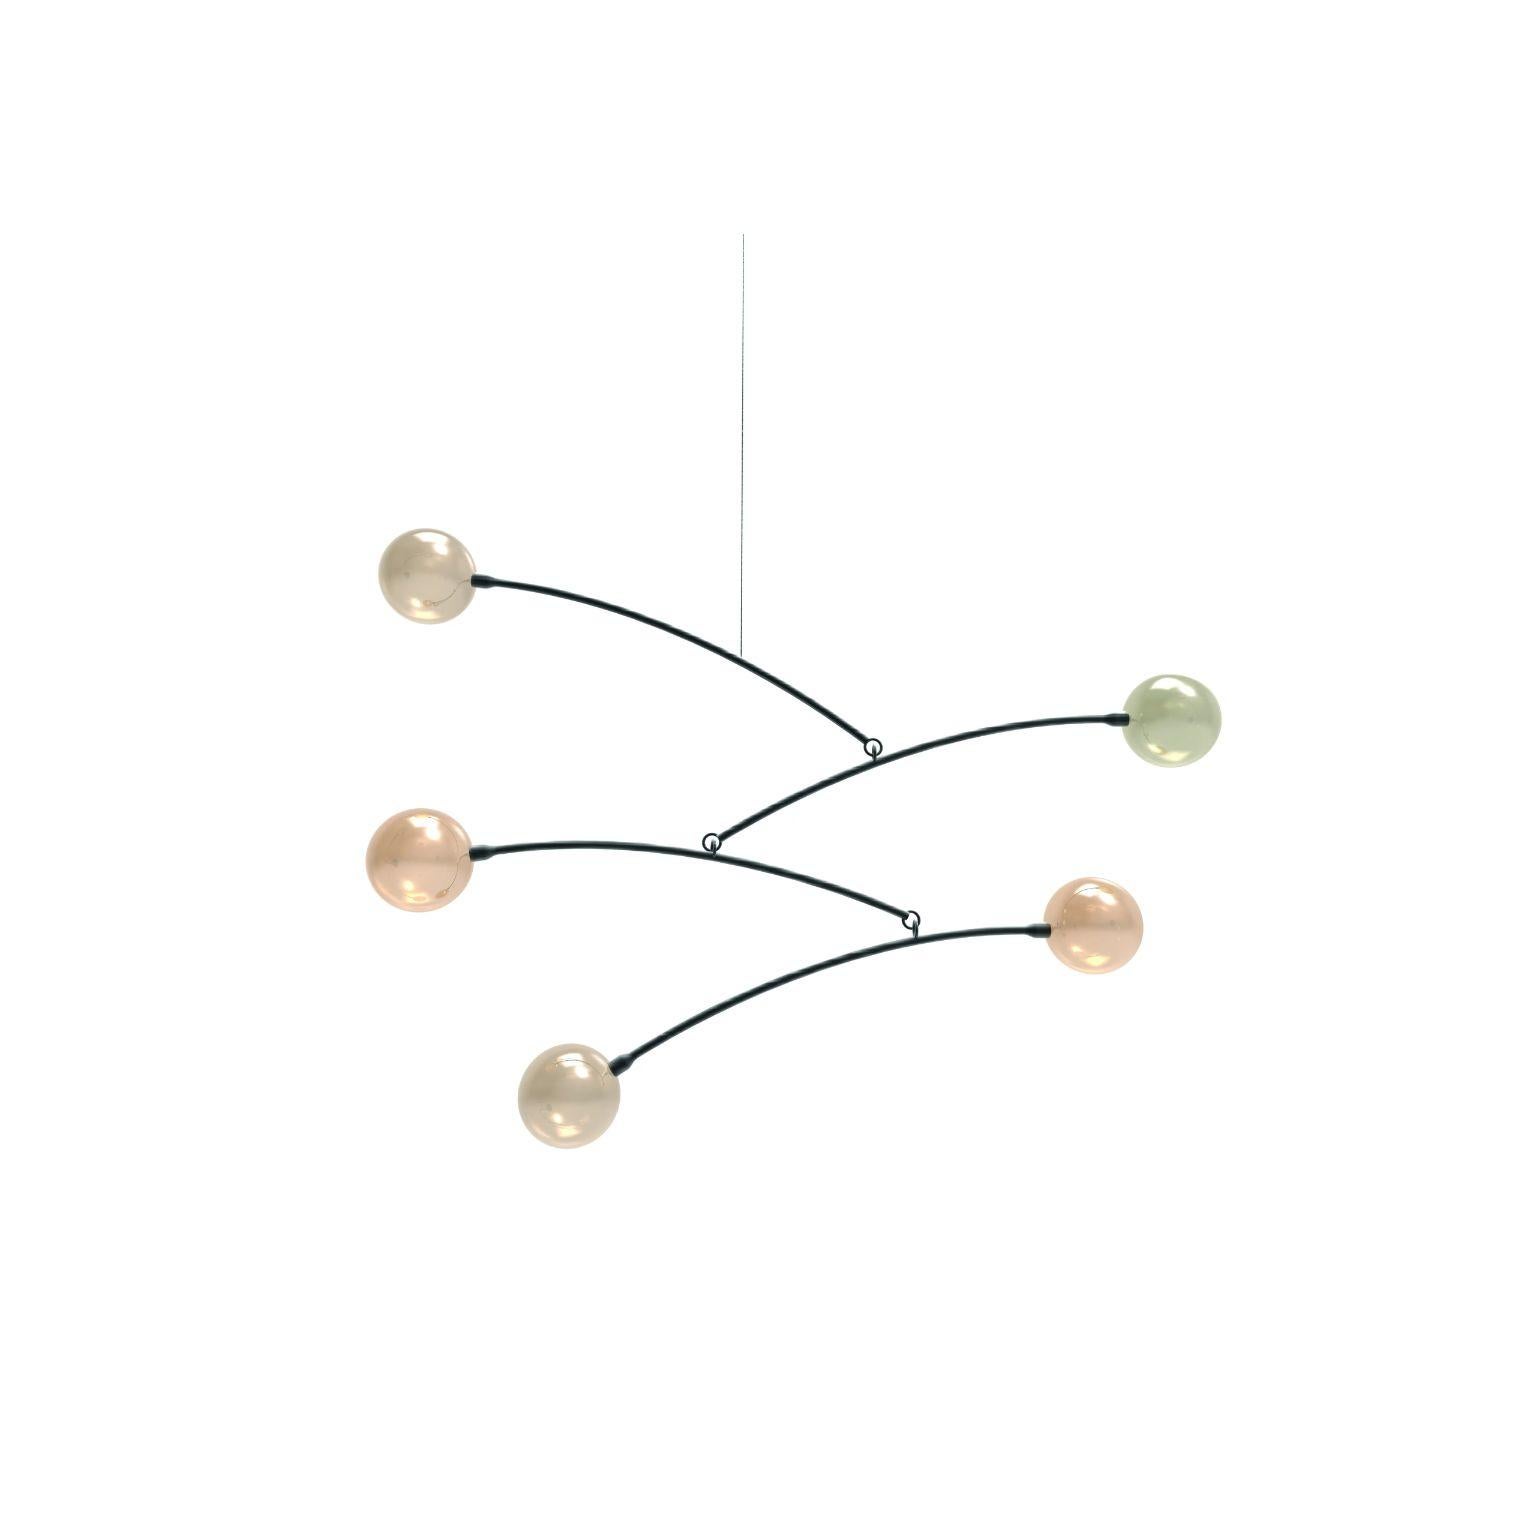 Eole lighting fixture #5 by Emilie Lemardeley
Dimensions: D100 x W20 x H70 cm
Materials: Black steel, hand blown glass
Weight: 8 kg

The lighting fixtures in the Eole collection are mobiles and move according to the wind and movements in the